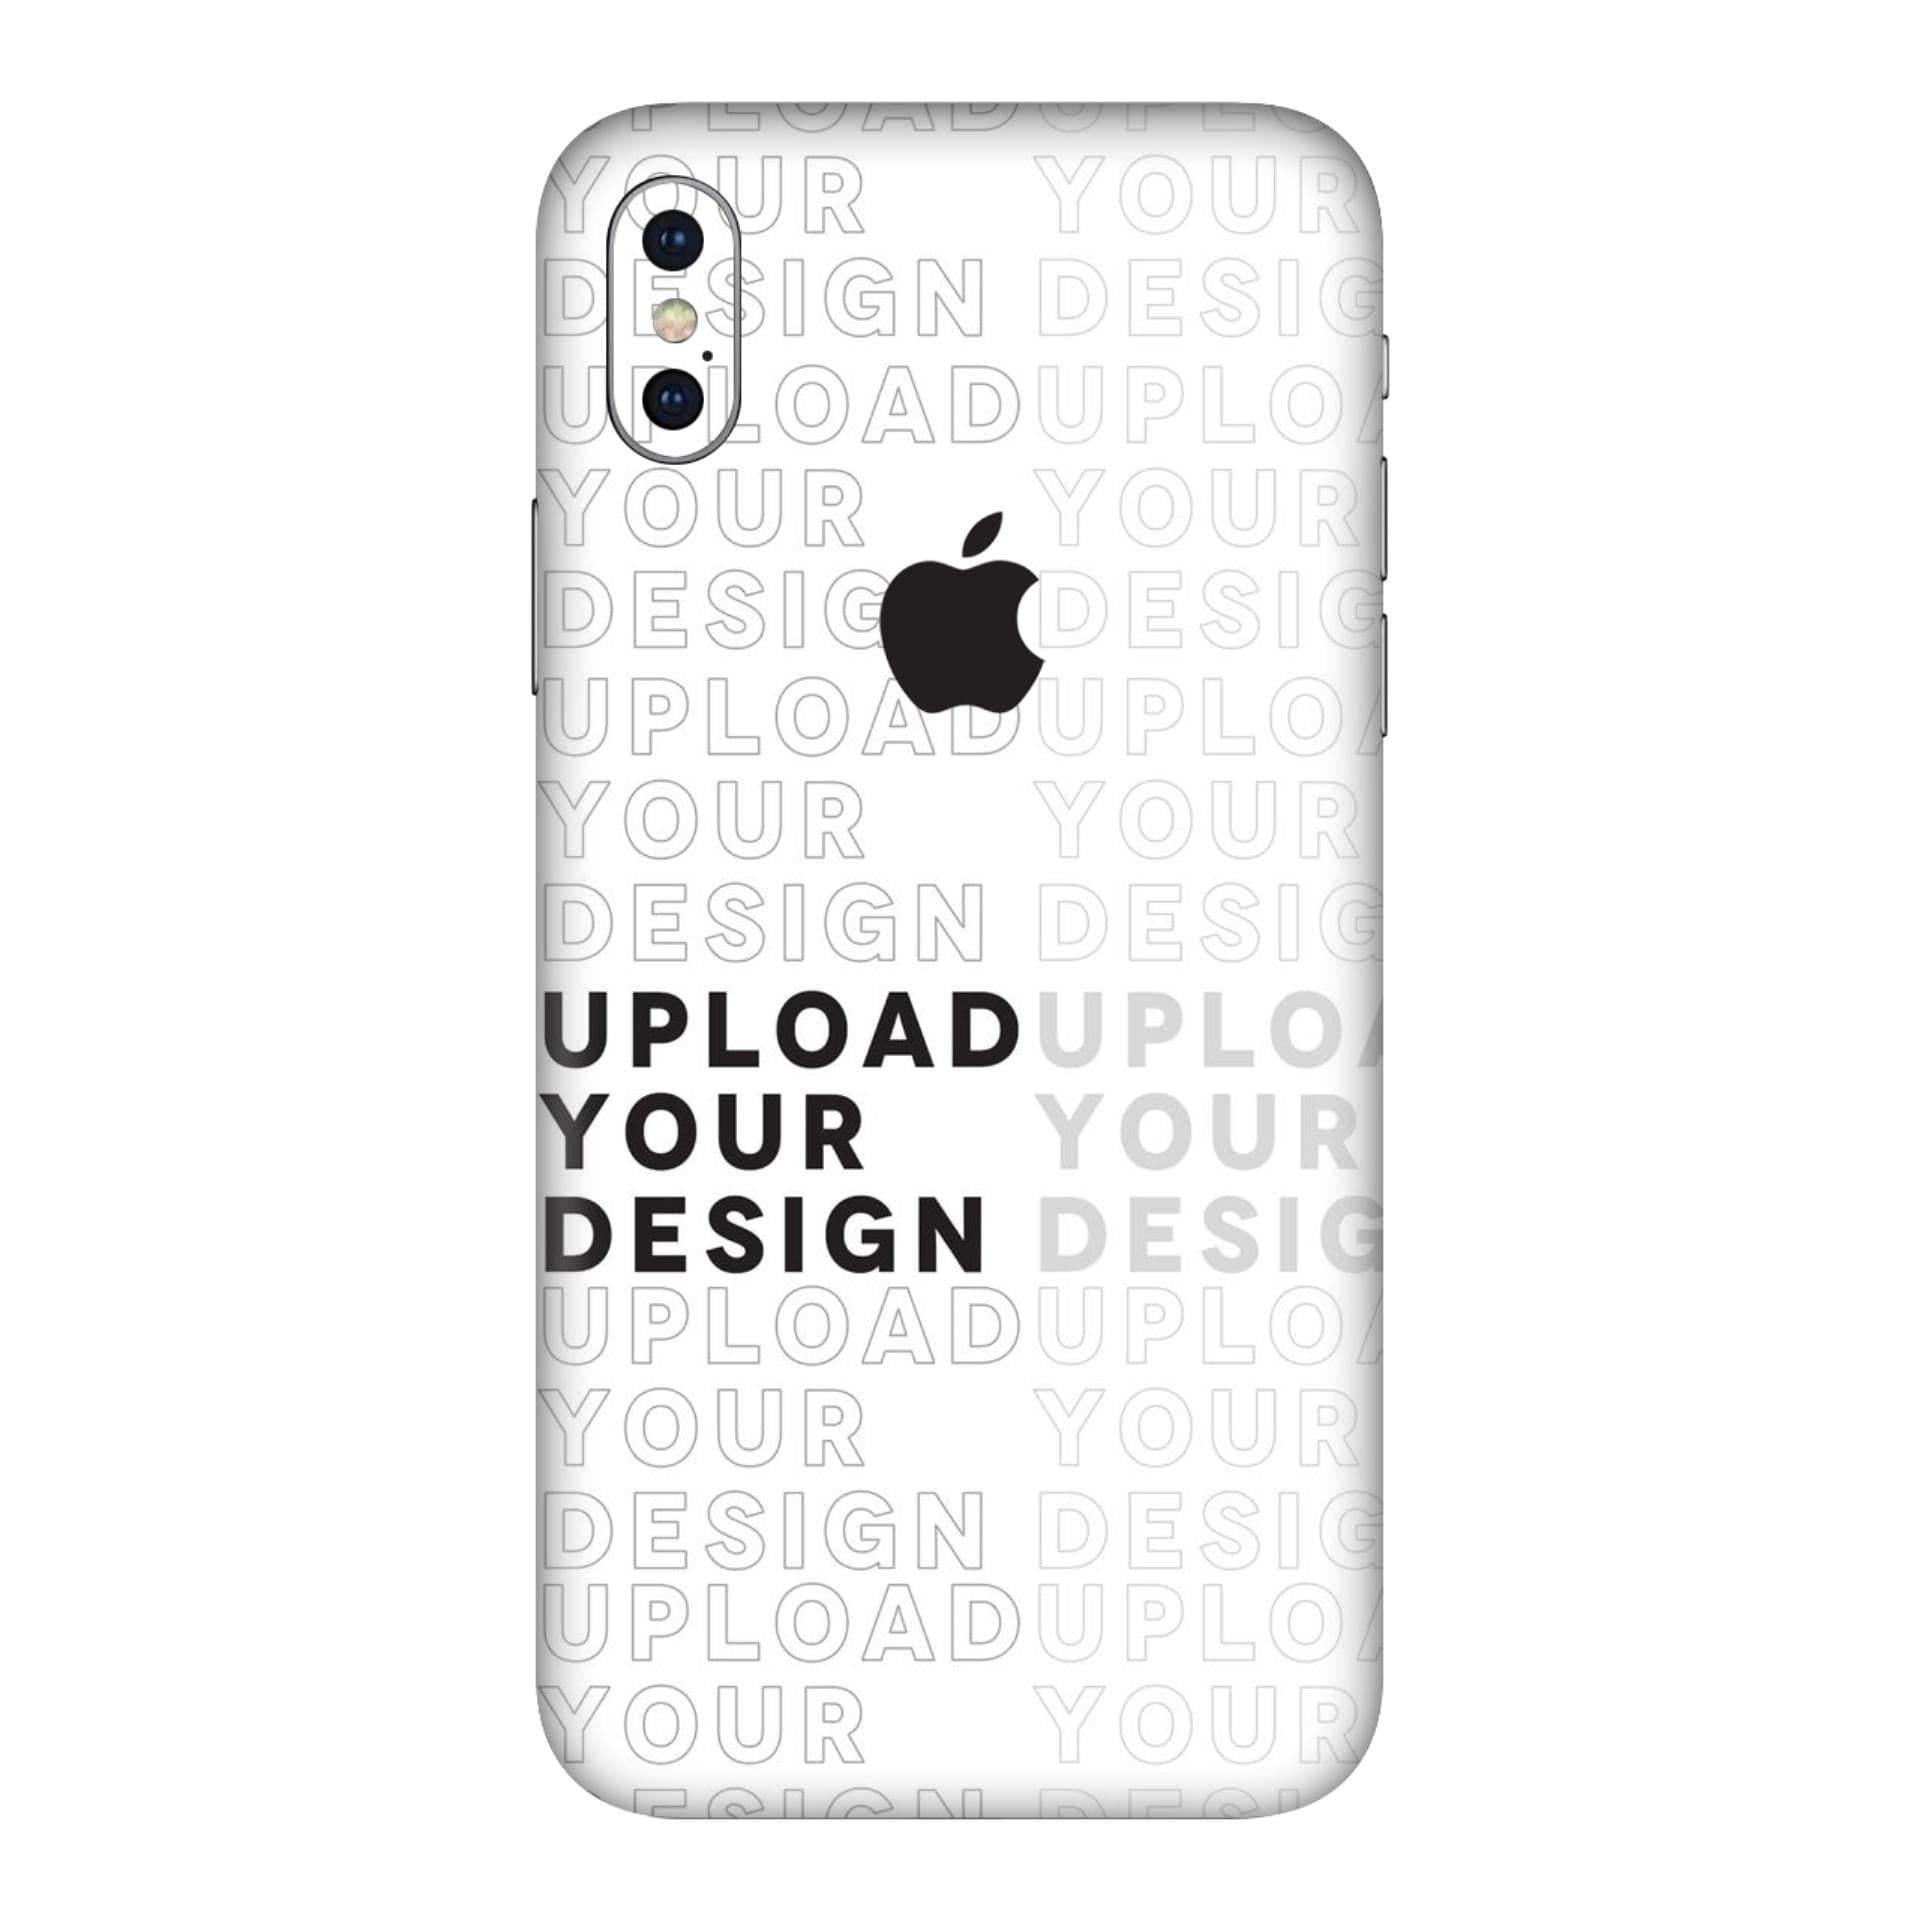 iphone X UPLOAD YOUR OWN skins